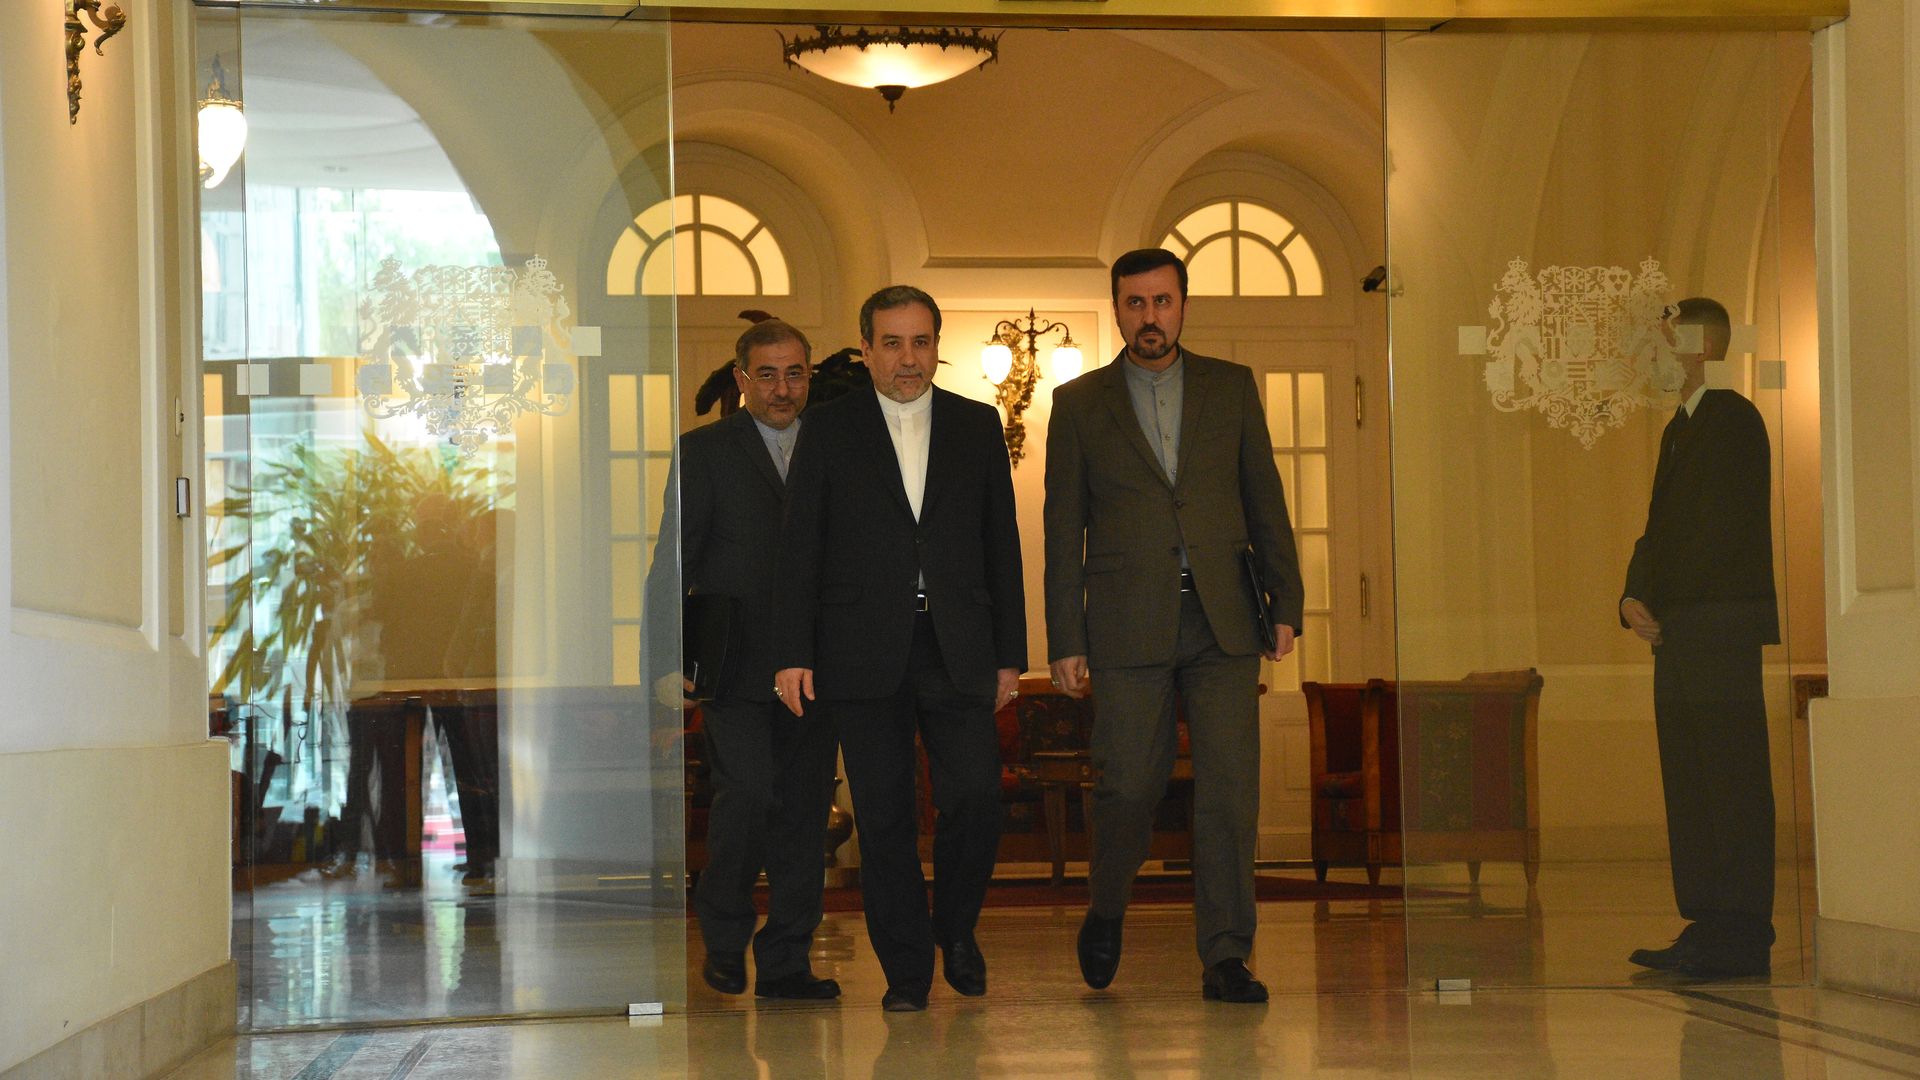 ranian Deputy Foreign Minister Abbas Araghchi (2nd L) arrives to make a speech after attending Joint Comprehensive Plan of Action (JCPOA) meeting.